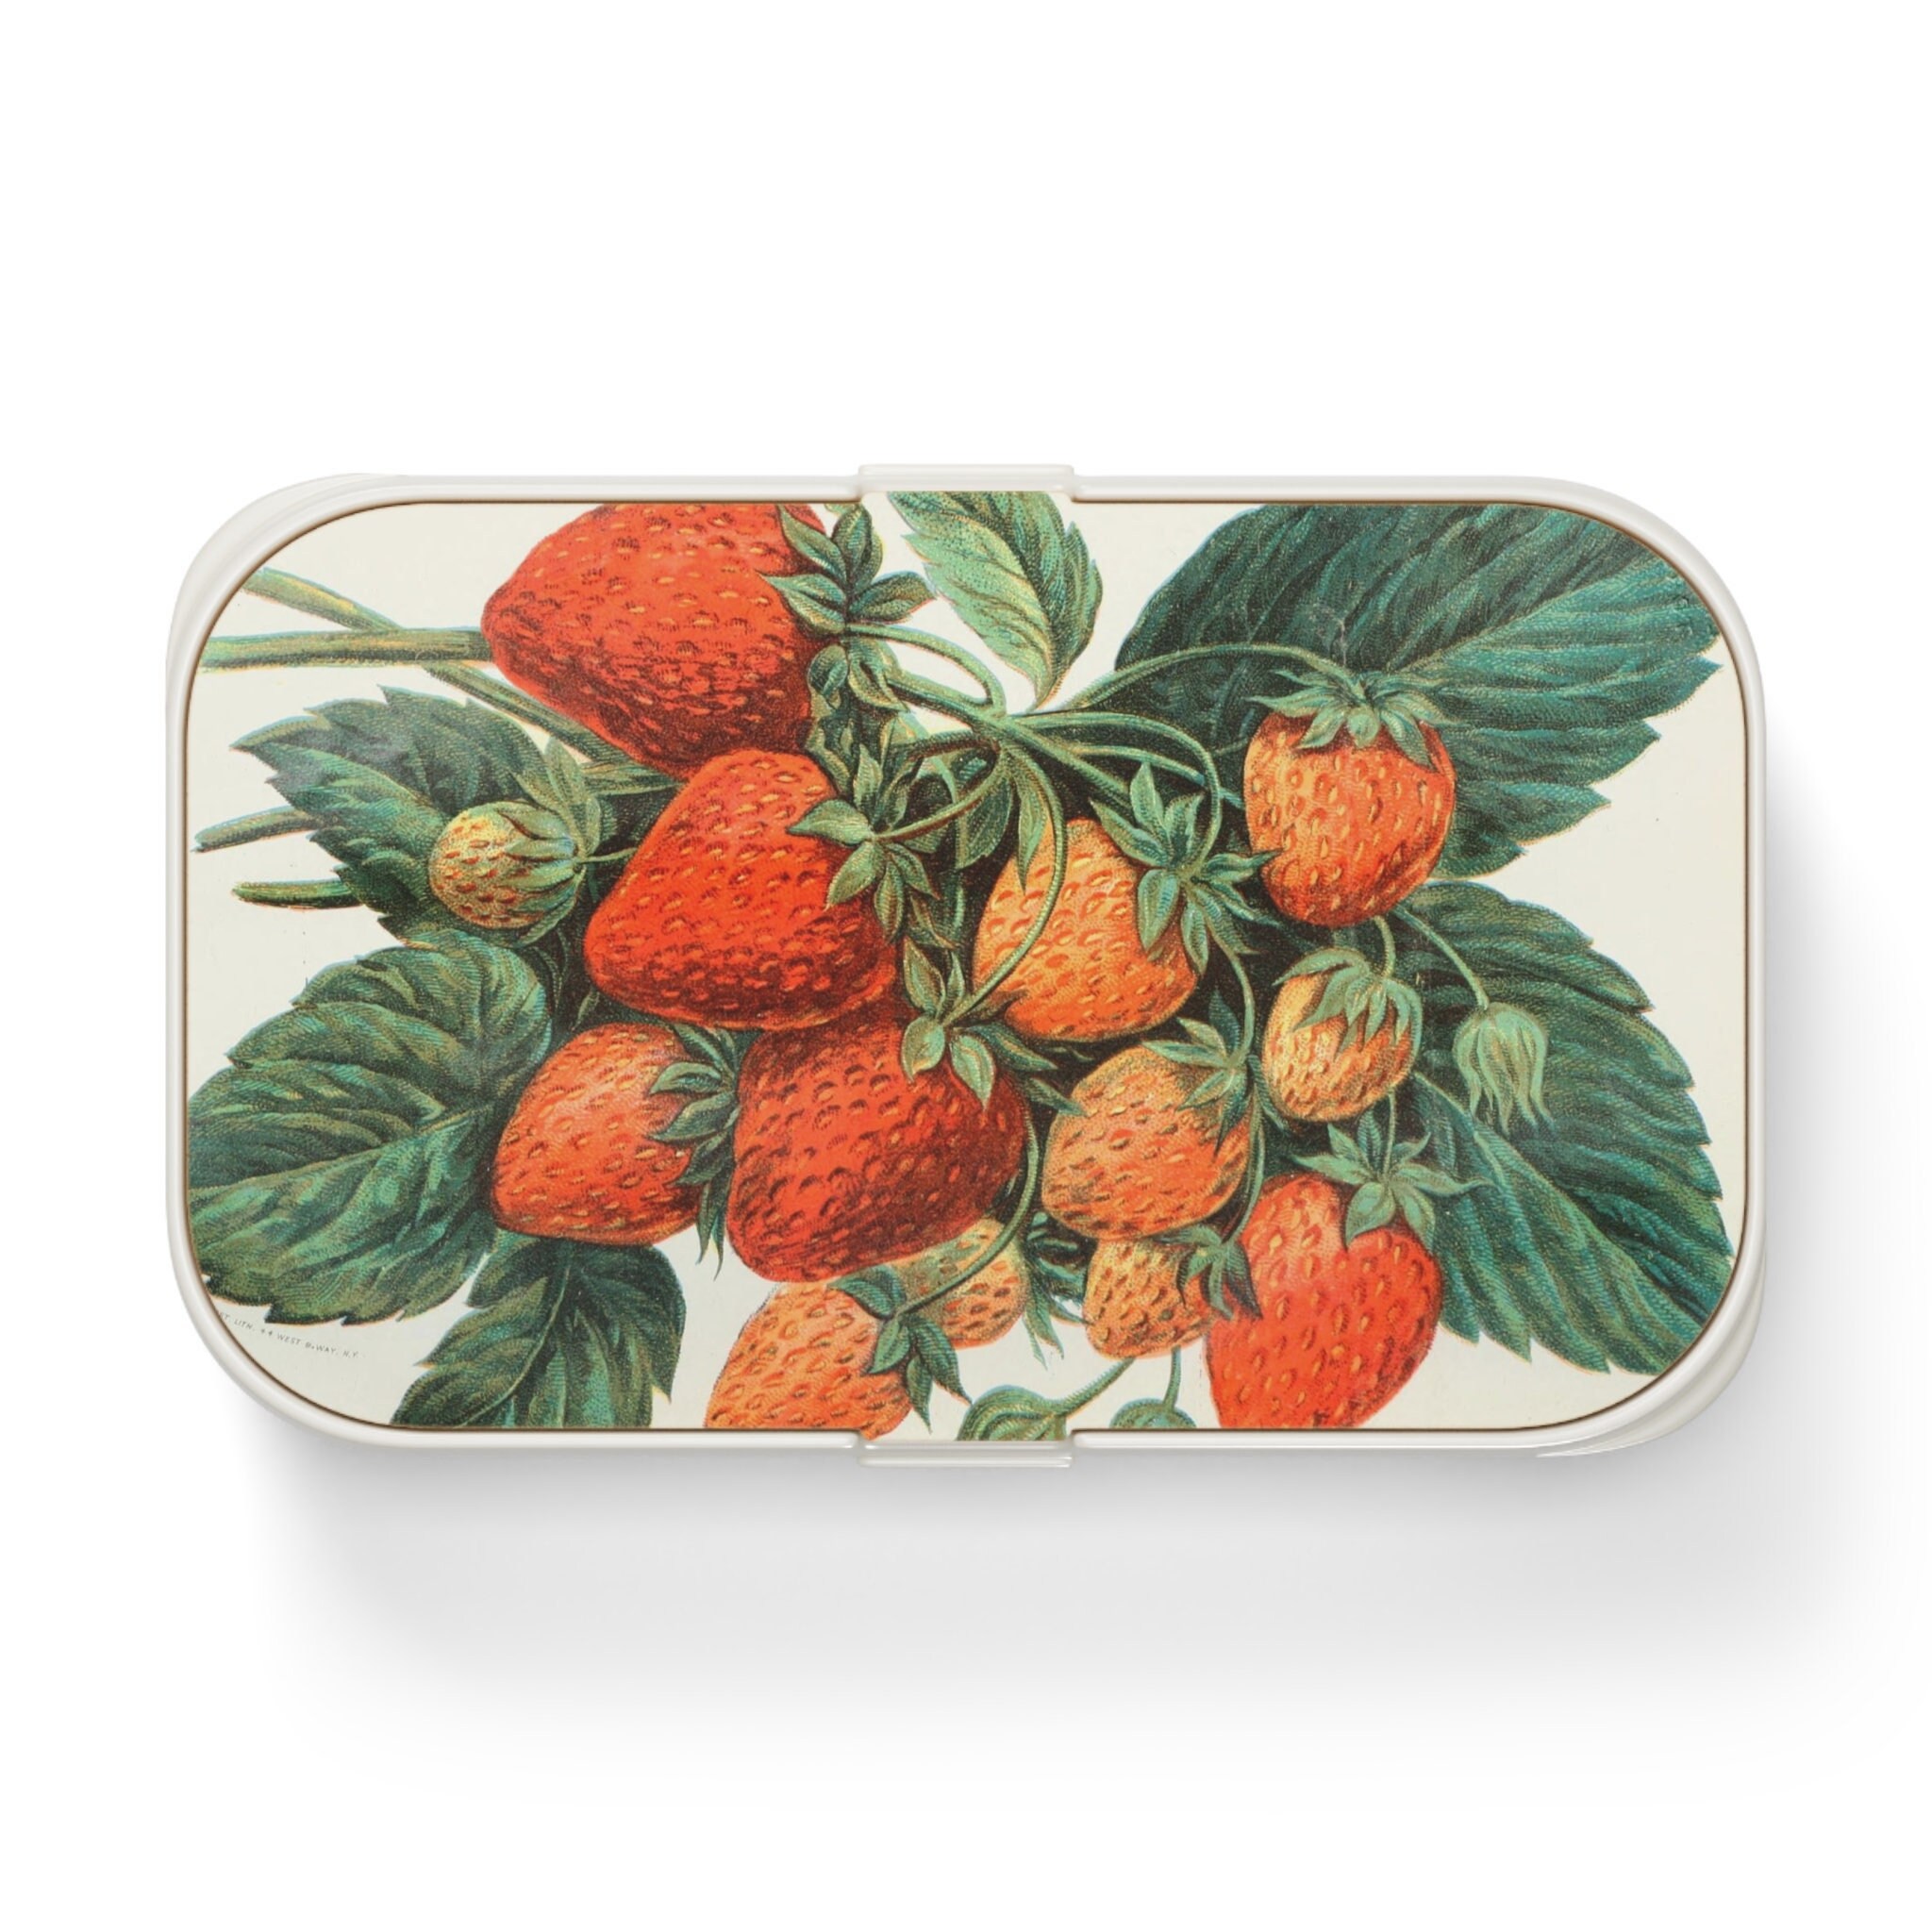 Discover Strawberries Bento Box, Cute Botanical Vintage Strawberry Art Asian Lunch Box